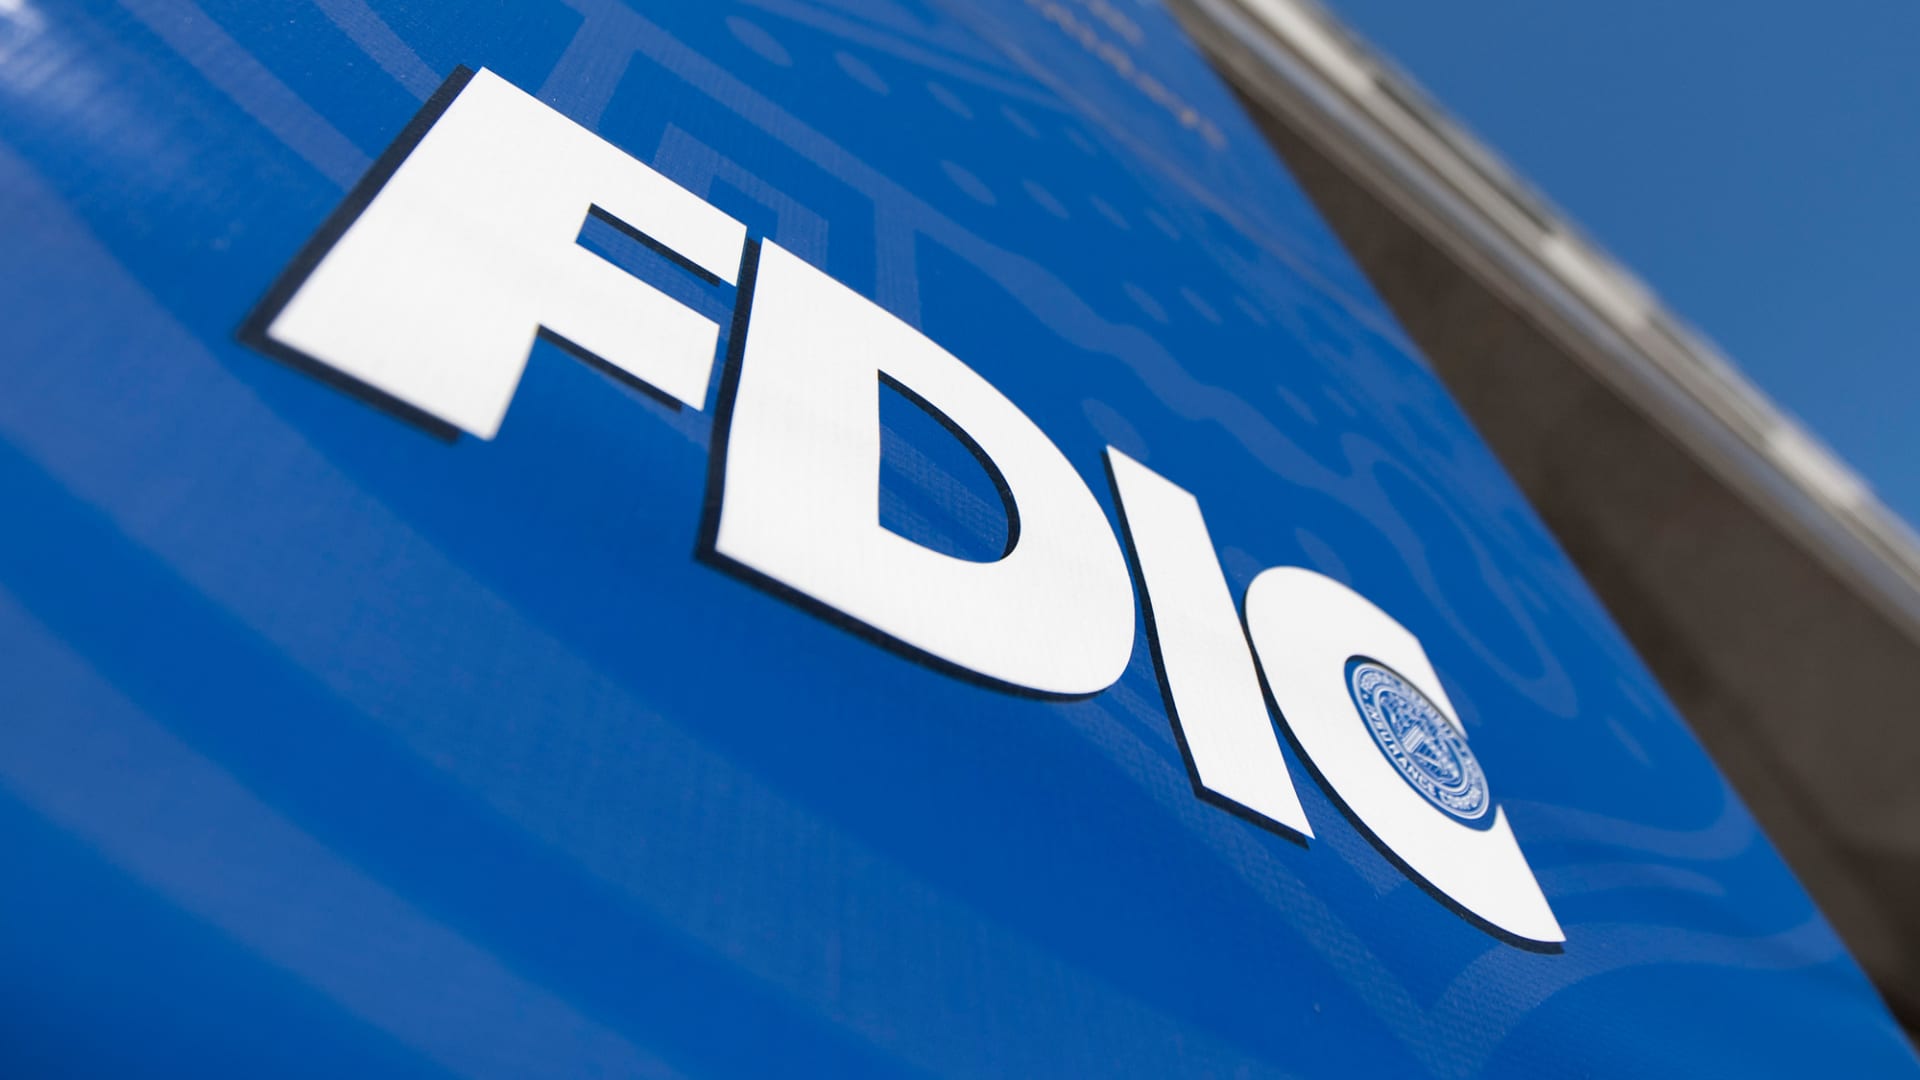 Fed and FDIC discussing backstop to make SVB depositors whole and stem contagion fears: Source